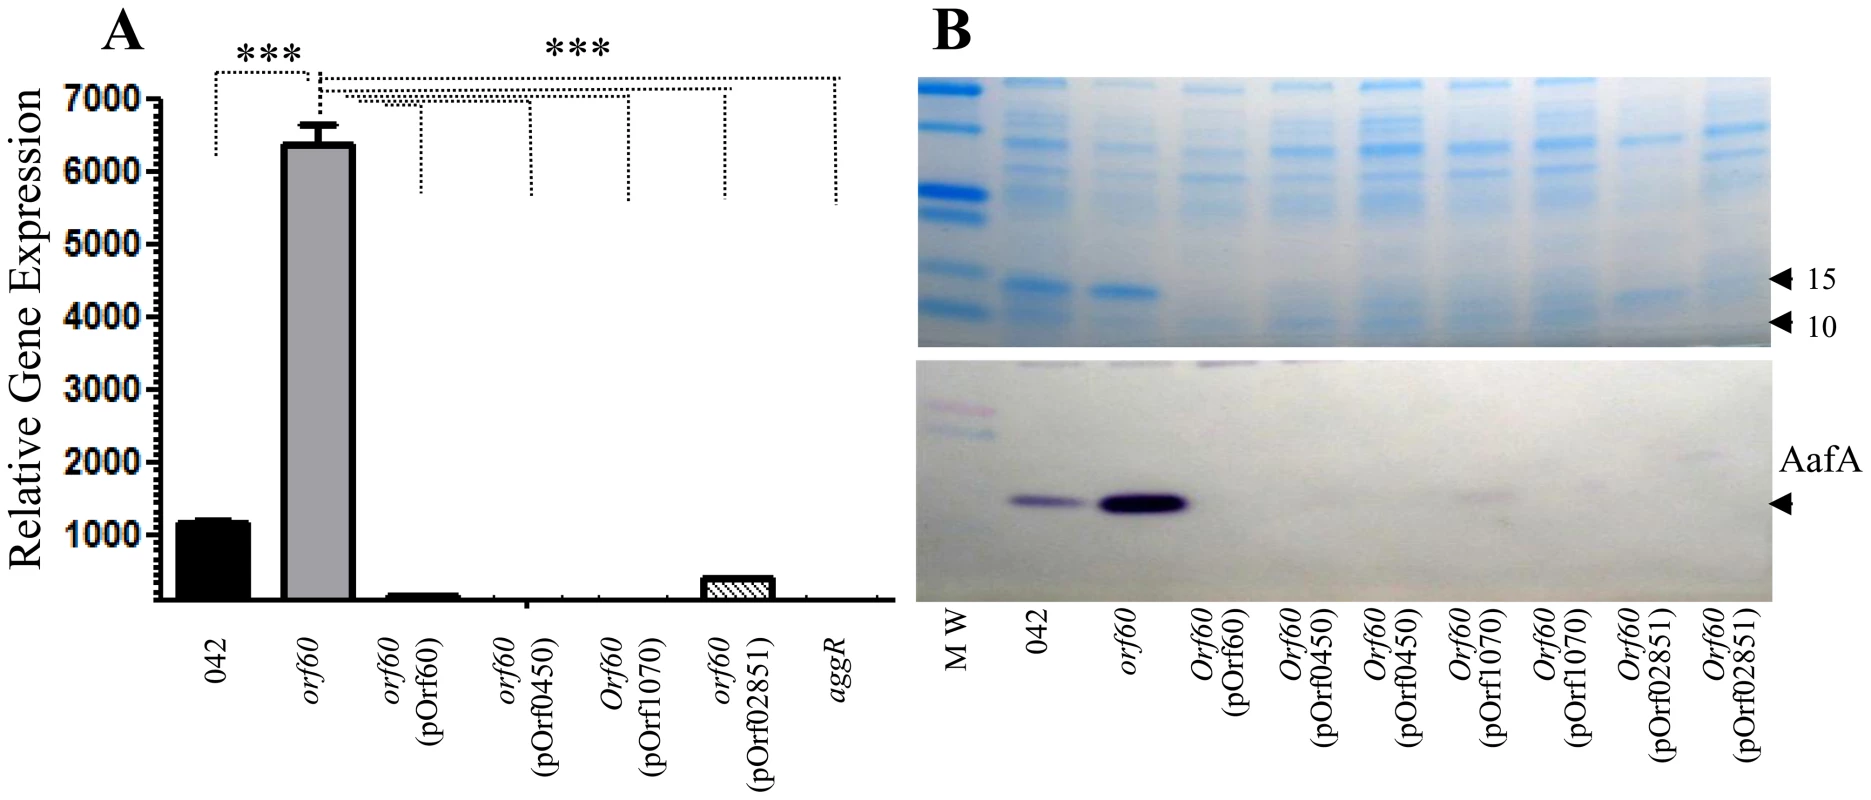 orf60 homologs from ETEC and <i>C. rodentium</i> repress AggR.